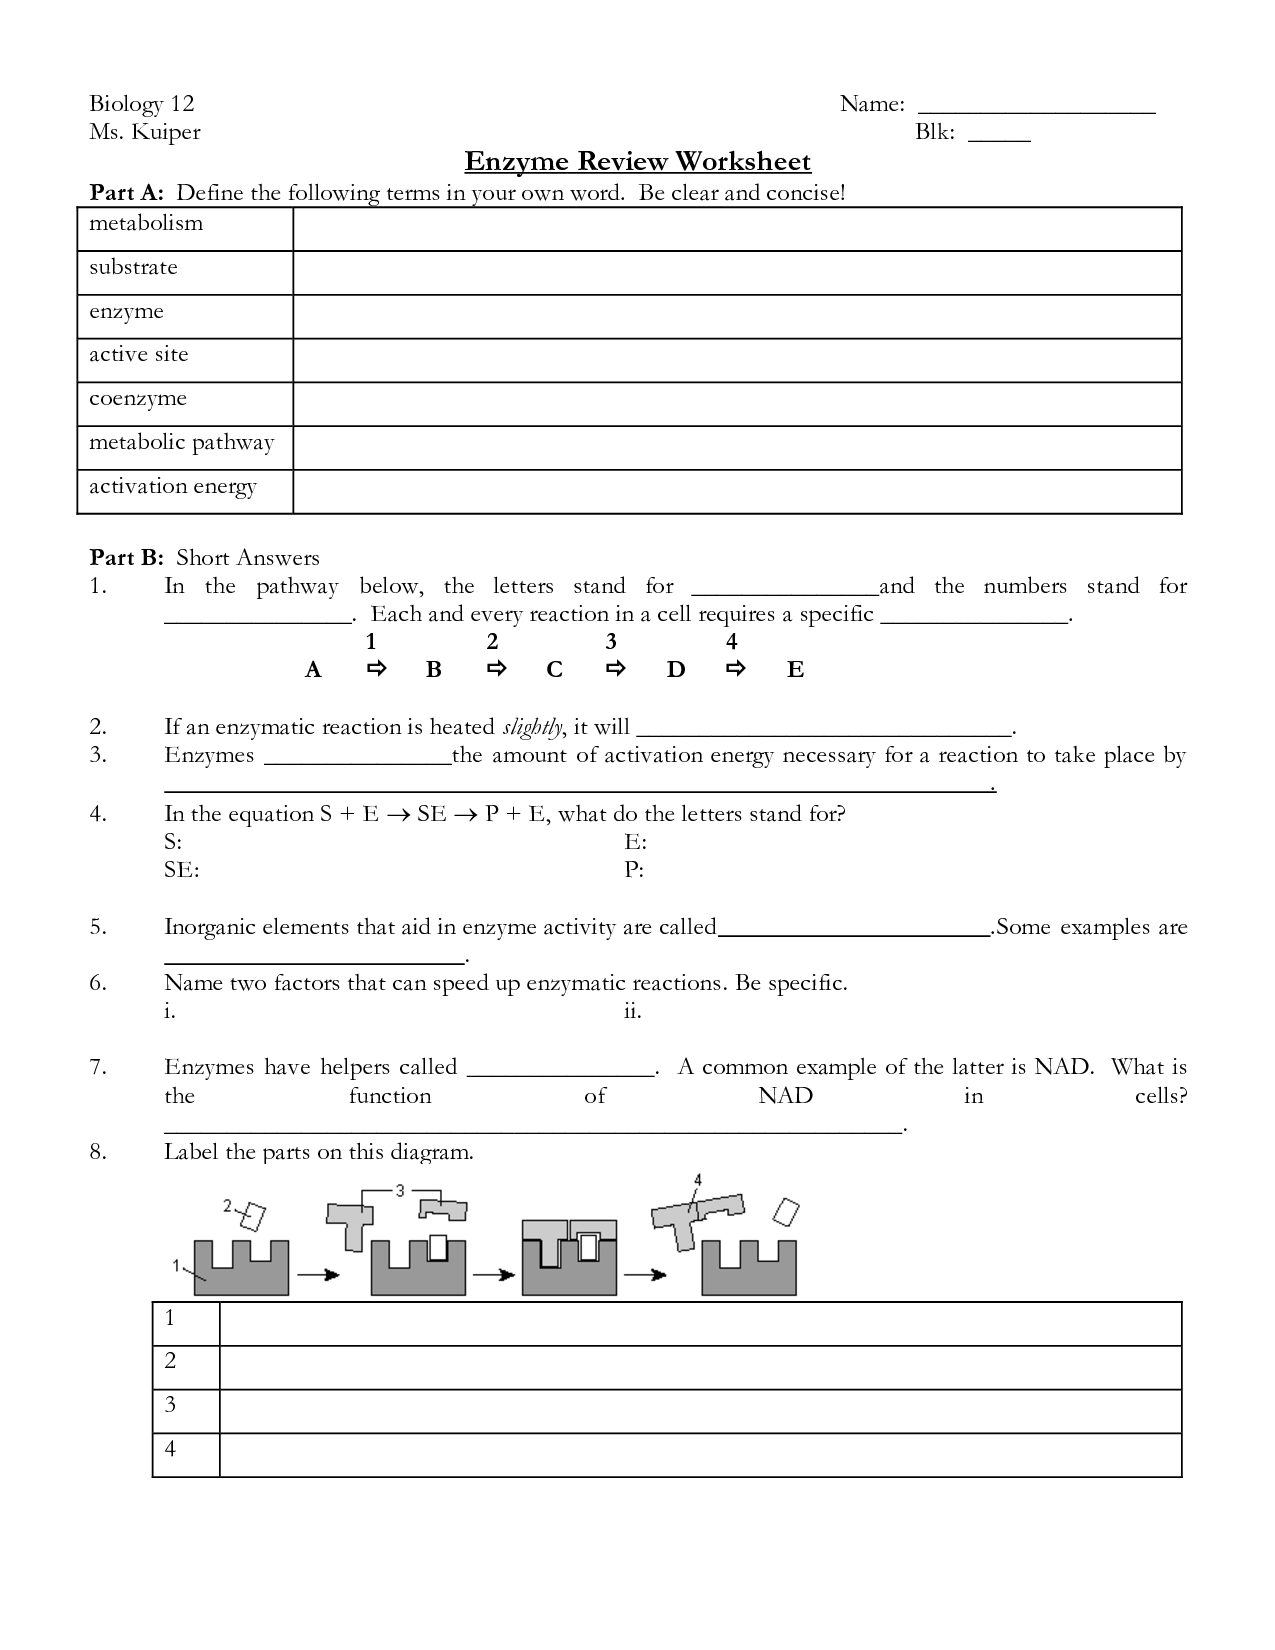 16 Best Images of The 12 Cell Review Worksheet Answers Biology  Cell Organelles Worksheet 